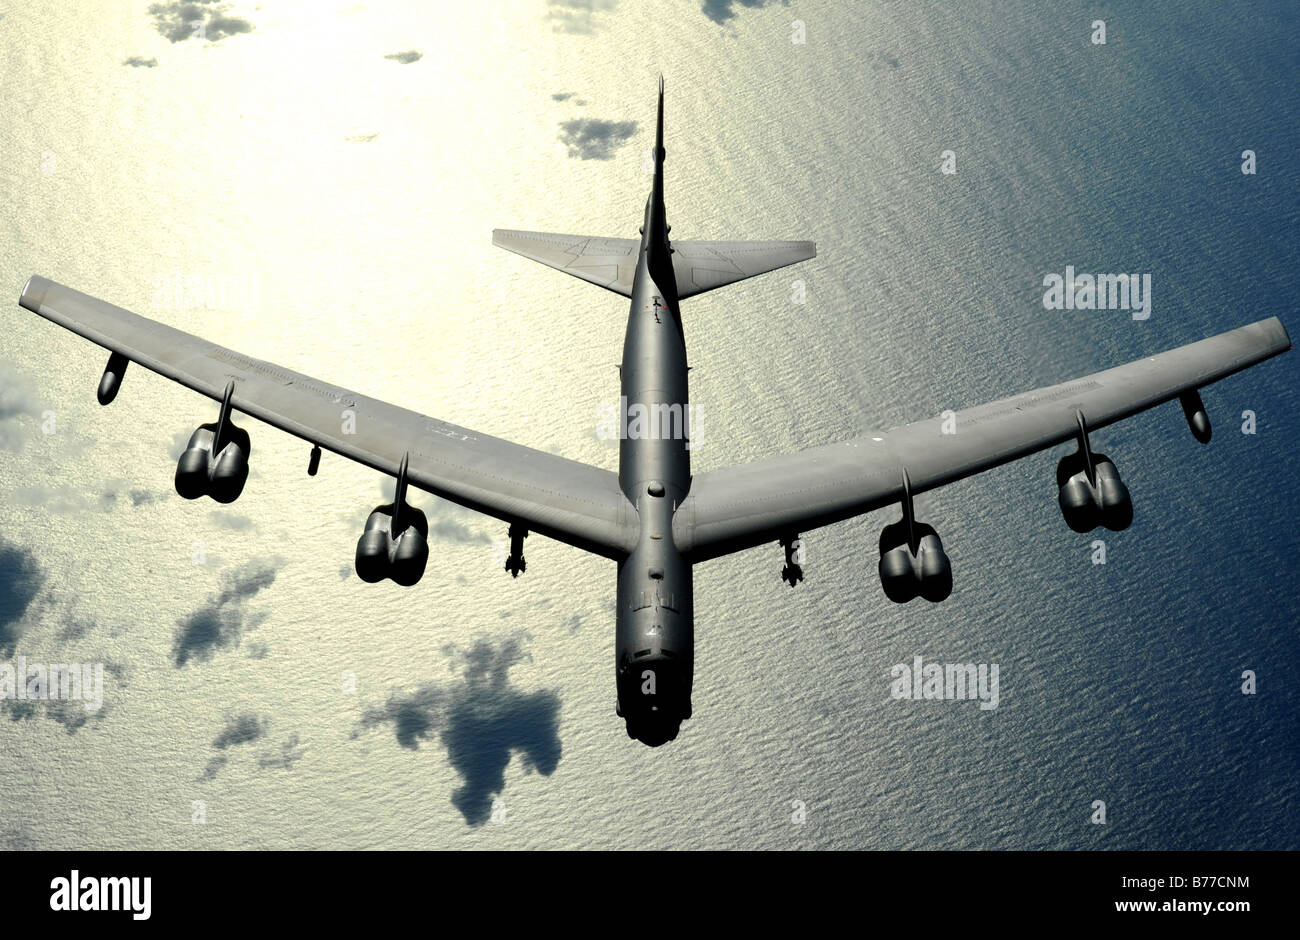 November 12, 2008 - A B-52 Stratofortress in flight over the Pacific Ocean. Stock Photo